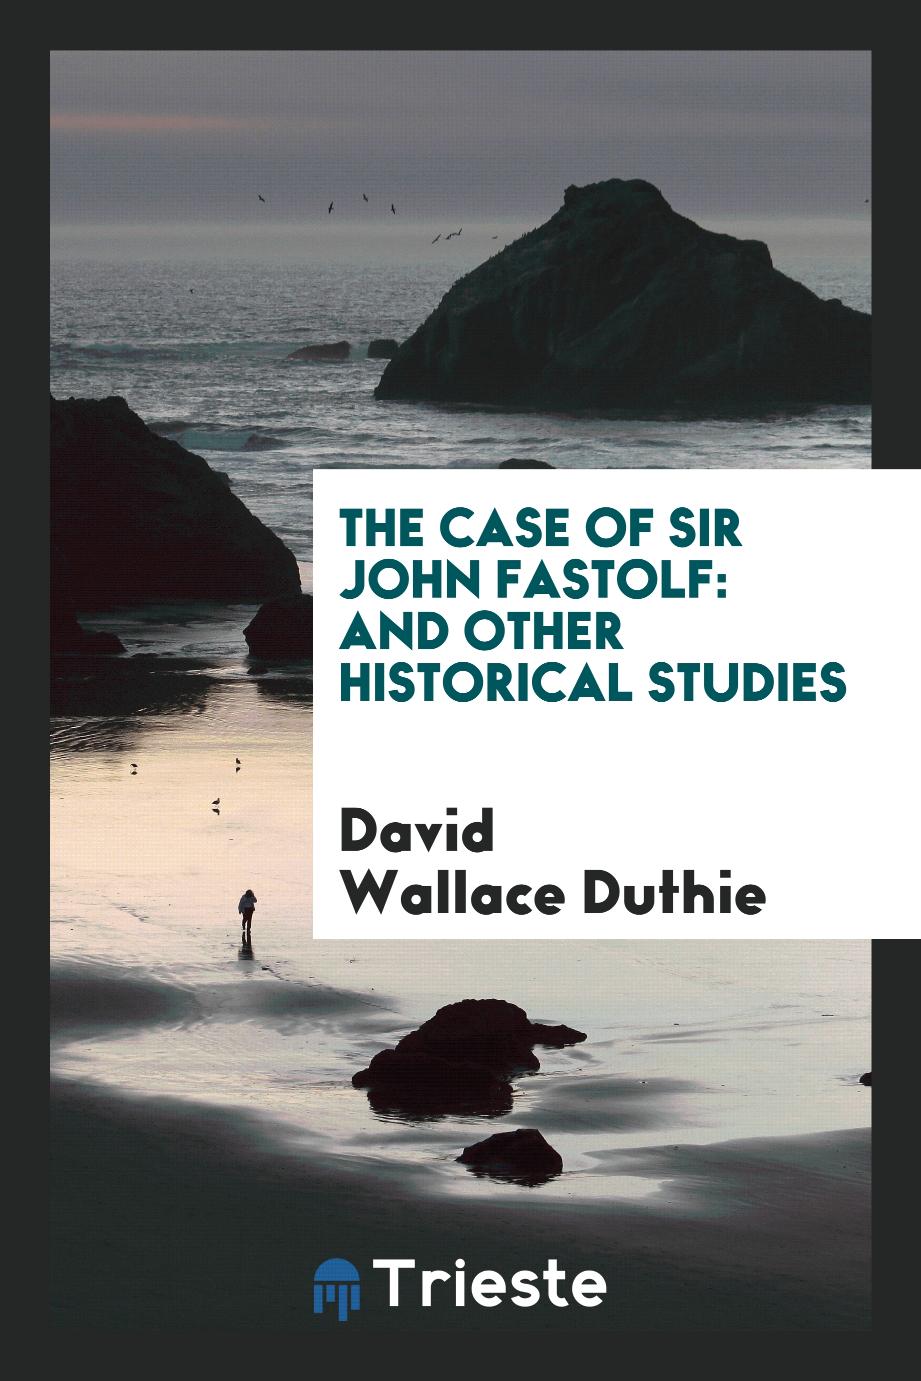 The Case of Sir John Fastolf: And Other Historical Studies